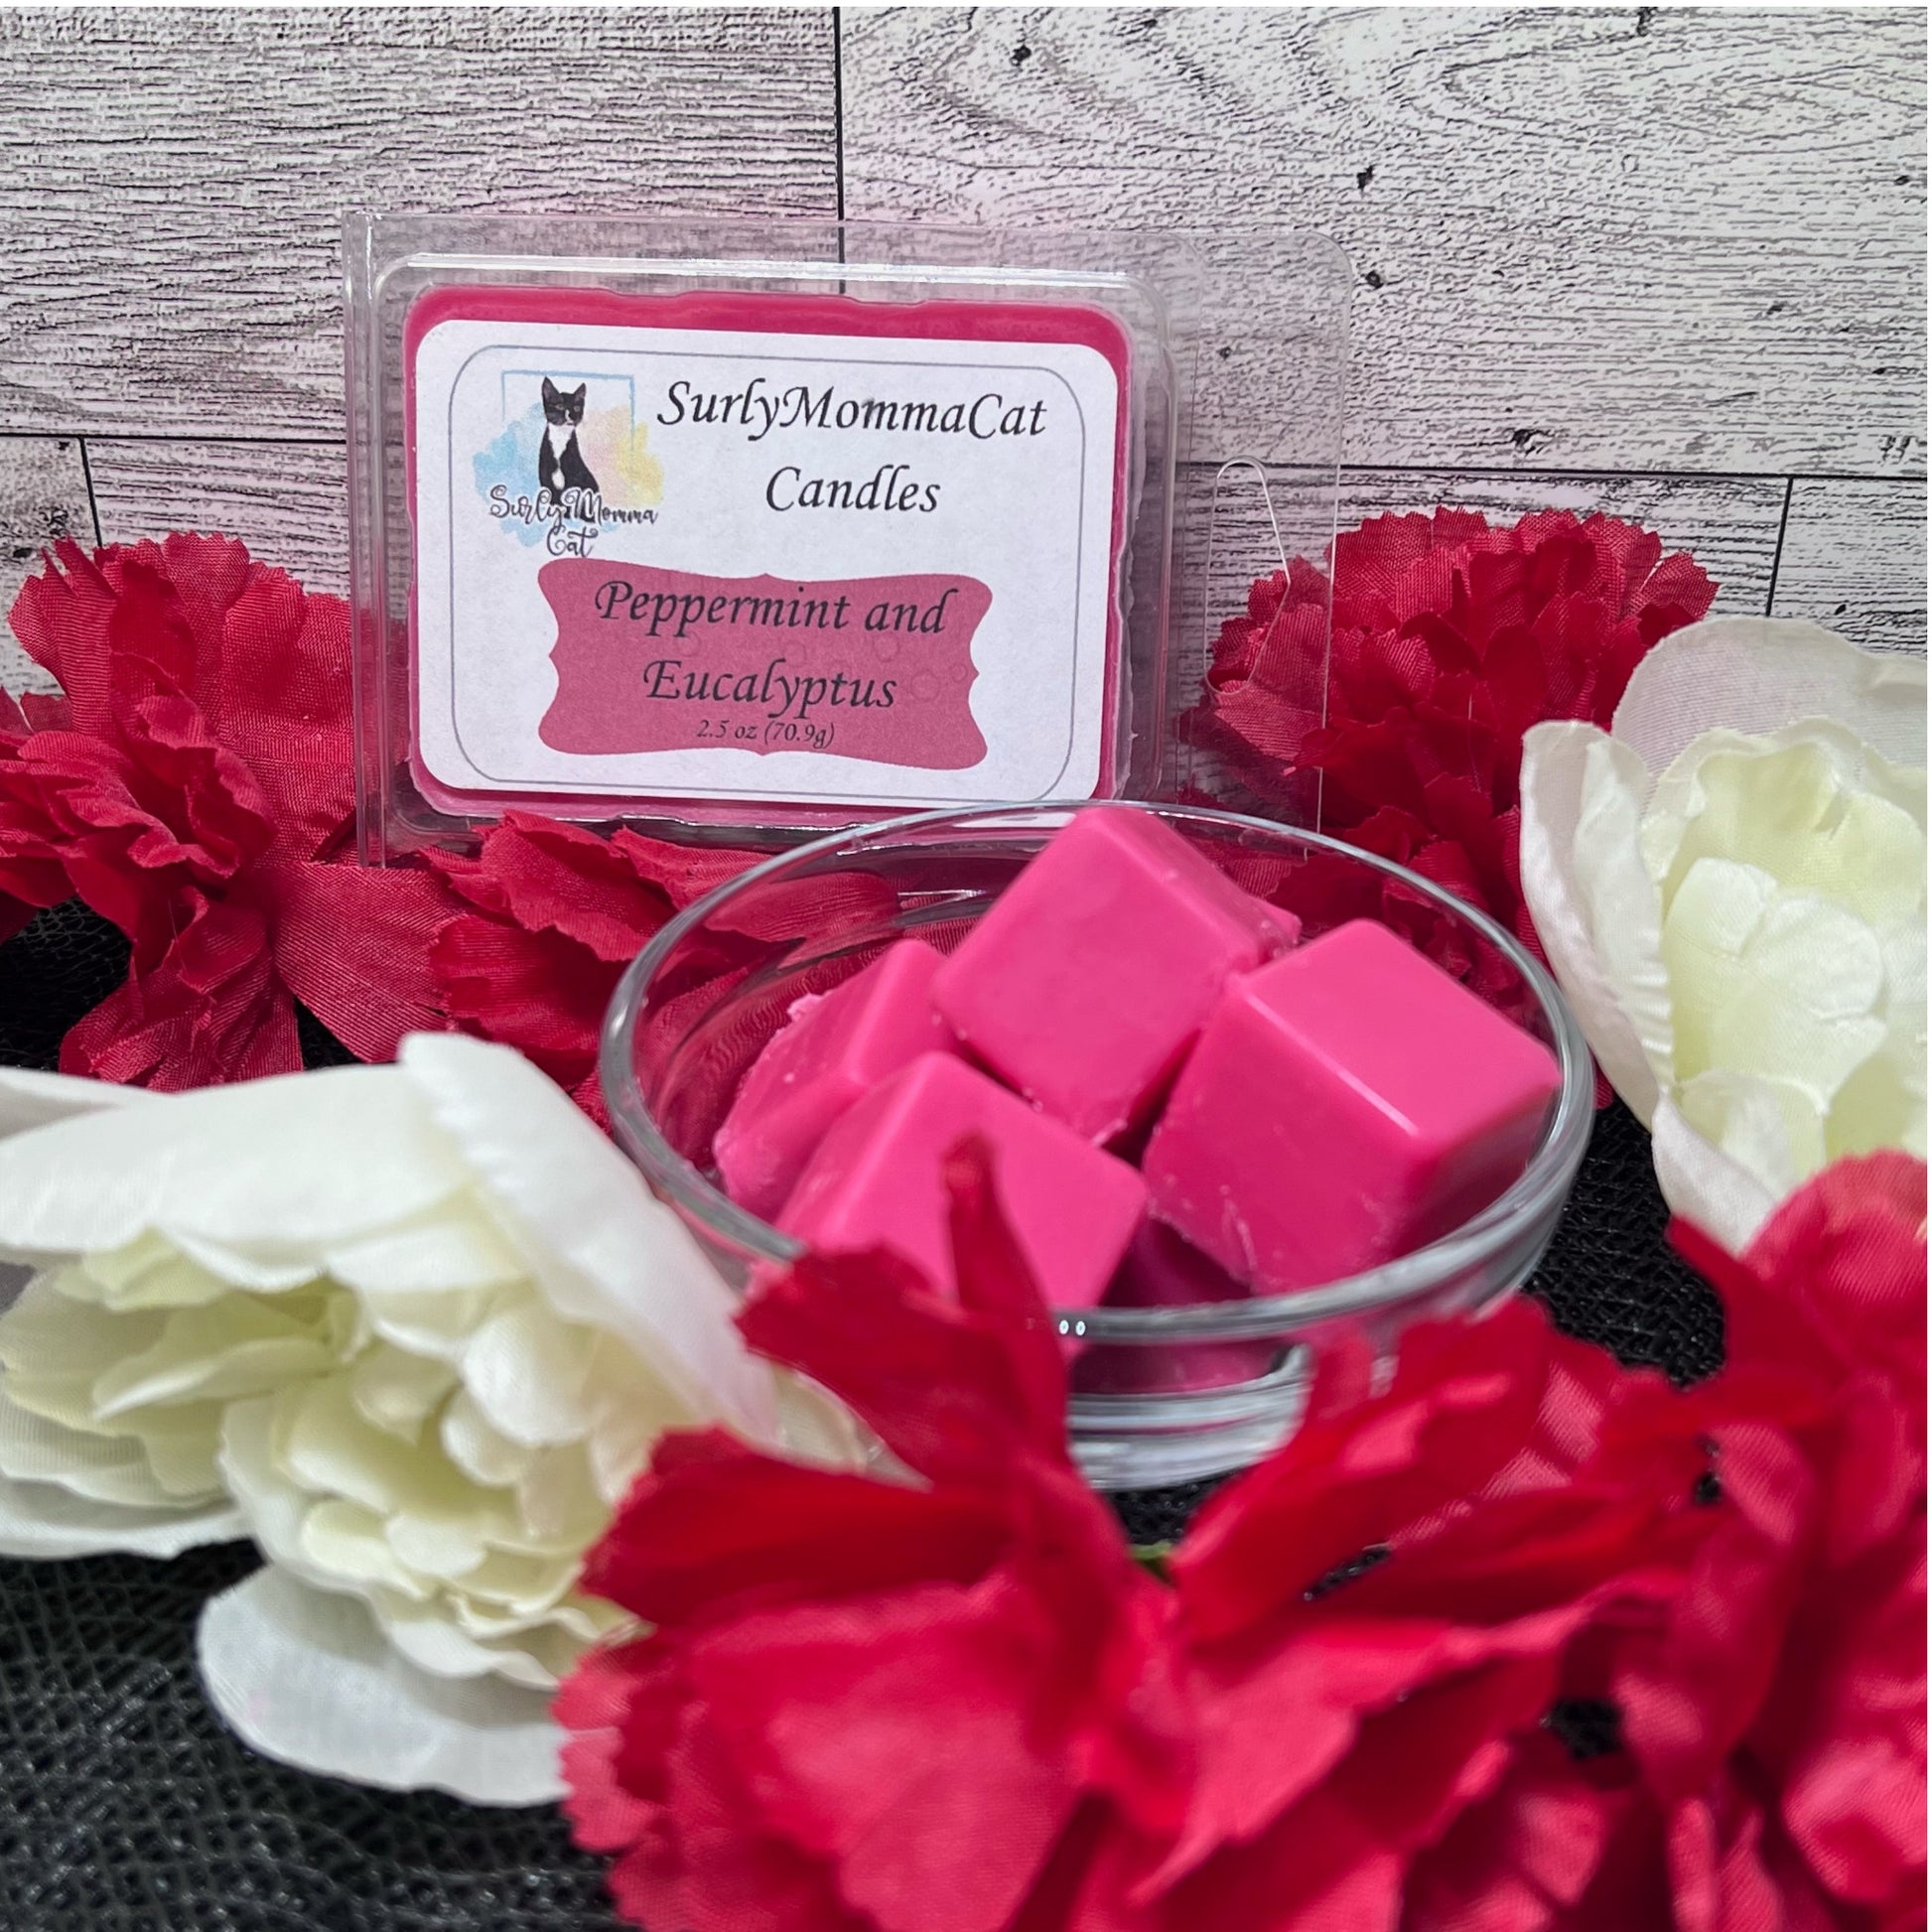 A warm scented Peppermint and Eucalyptus Christmas scene, with the featured wax melts in both it's packaging box and in a bowl ready for use, accenting the scene as background decoration lies red and white flowers,  creating a lovely foundation of holiday cheer.